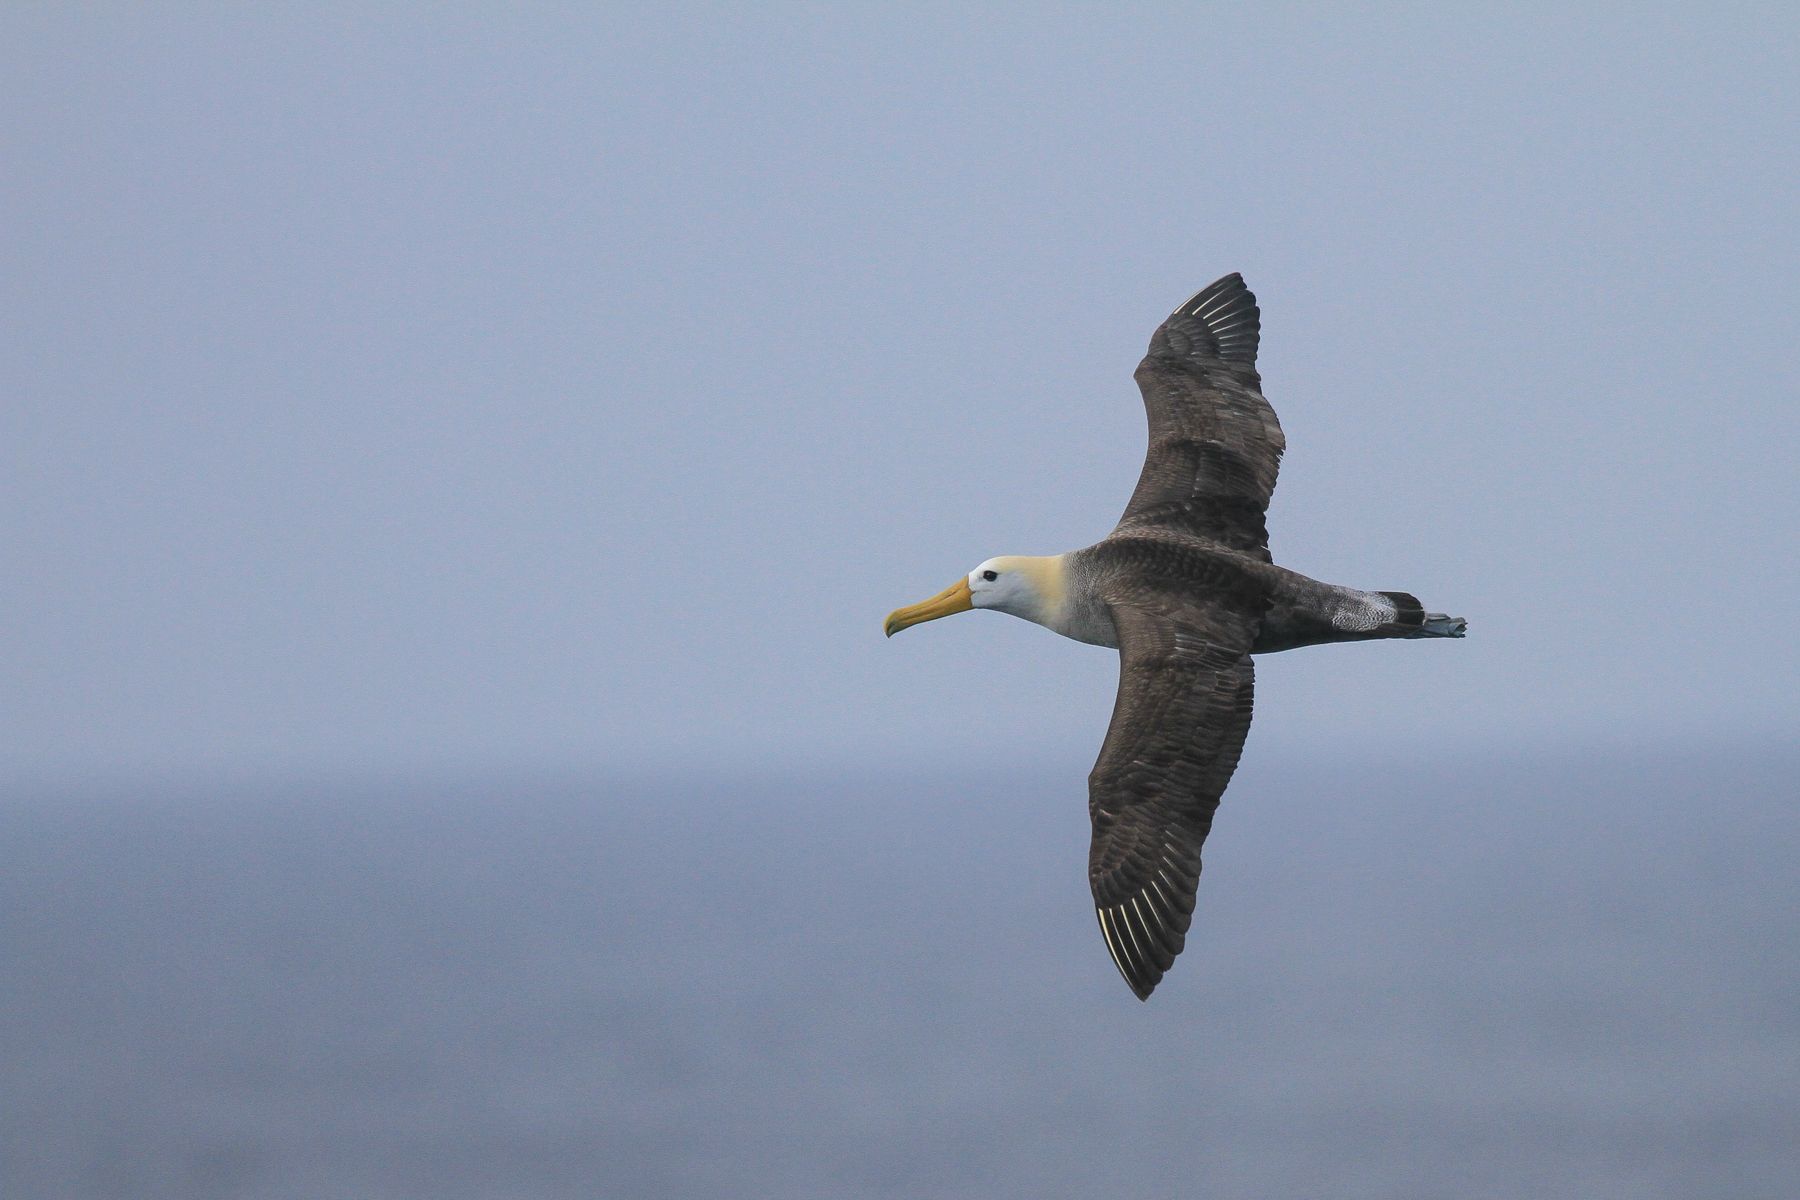 Another much-loved Galapagos seabird is the huge Waved Albatross